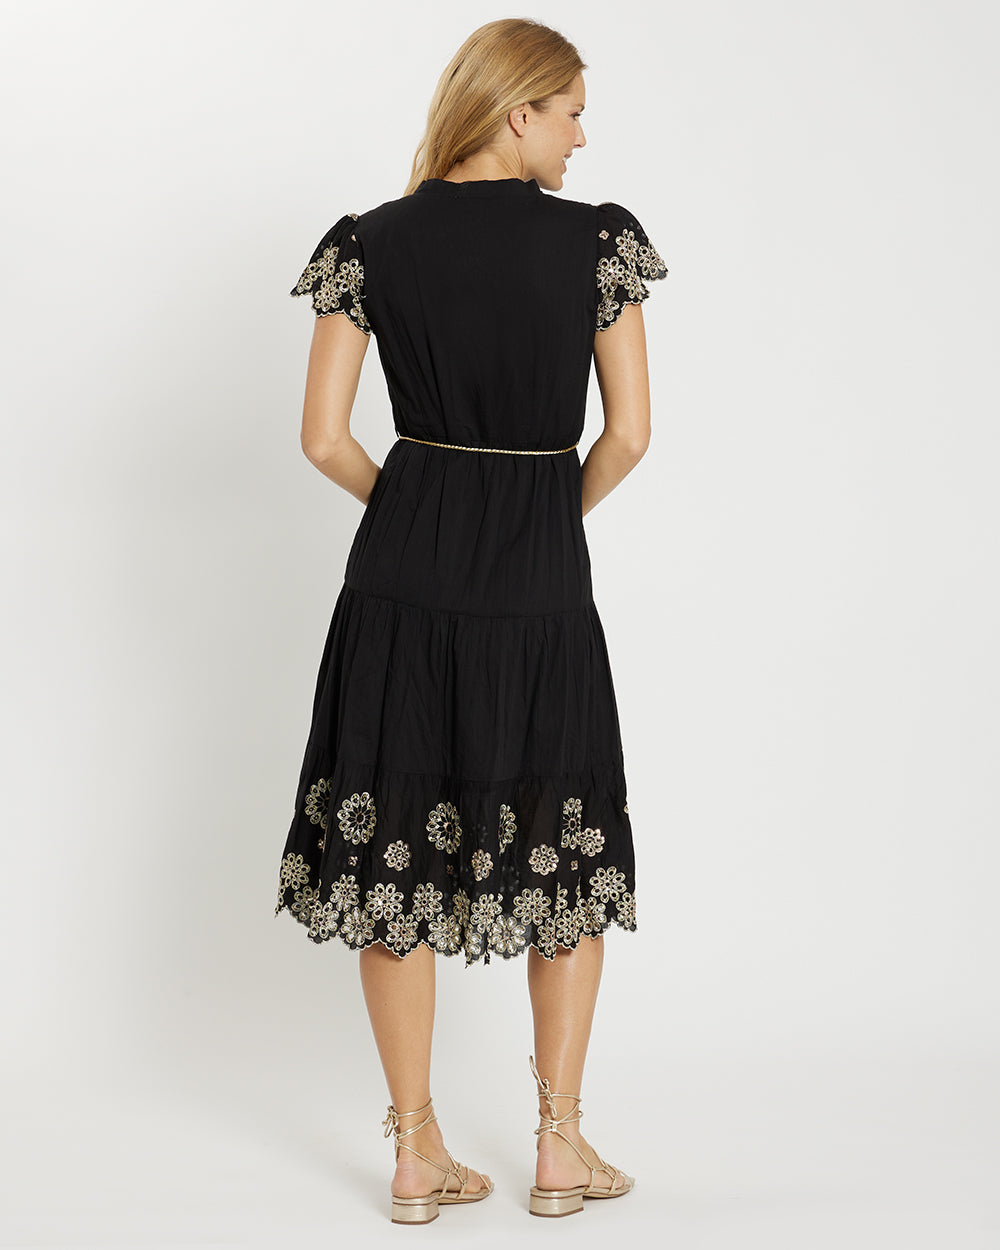 Libby Dress - Embroidered Cotton